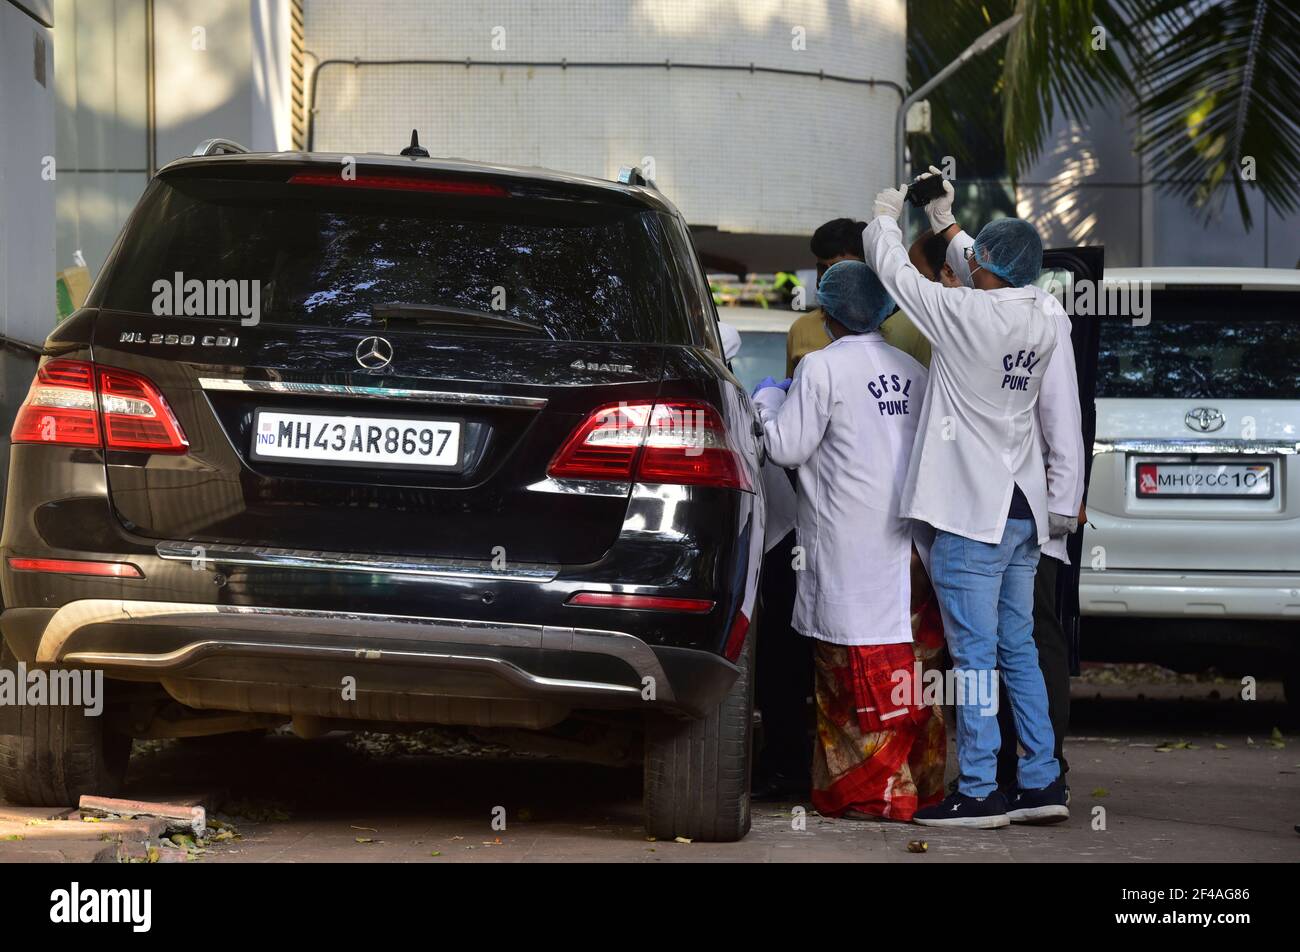 MUMBAI, INDIA - MARCH 19: A team from Pune Forensic Science Laboratory (FSL) investigating a vehicle seized in the Sachin Vaze case, at NIA office Peddar Road on March 19, 2021 in Mumbai, India. Forensics team from Pune to conduct specialised tests on the 6 cars seized by the NIA in the past few days, including a SUV Scorpio, 2 Mercedes, a Toyota Land Cruiser Prado and other models. Triggering a massive political furore, the SUV Scorpio was found abandoned outside Antilia, the home of industrialist Mukesh Ambani, along with 20 gelatin sticks and a threat note, which the NIA claims Vaze was usi Stock Photo